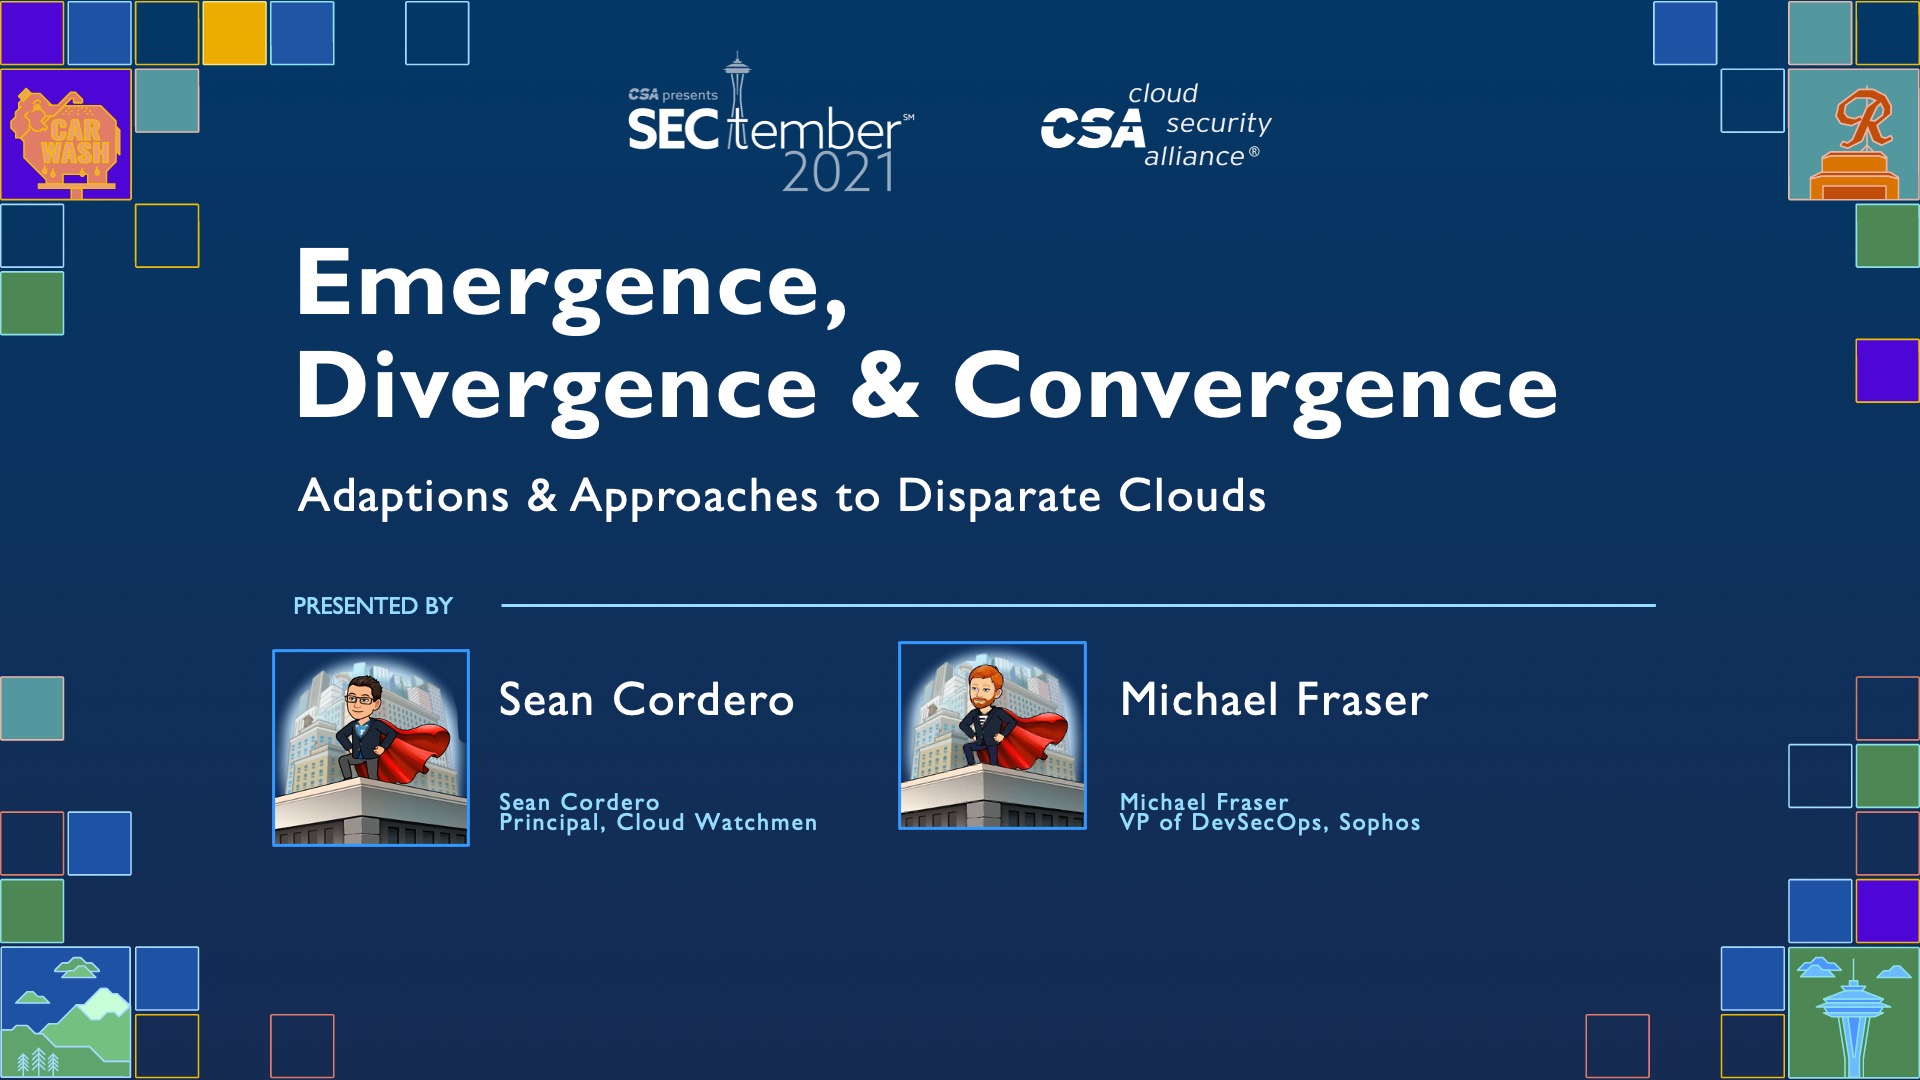 Emergence, Divergence & Convergence: Adapting to Disparate Clouds